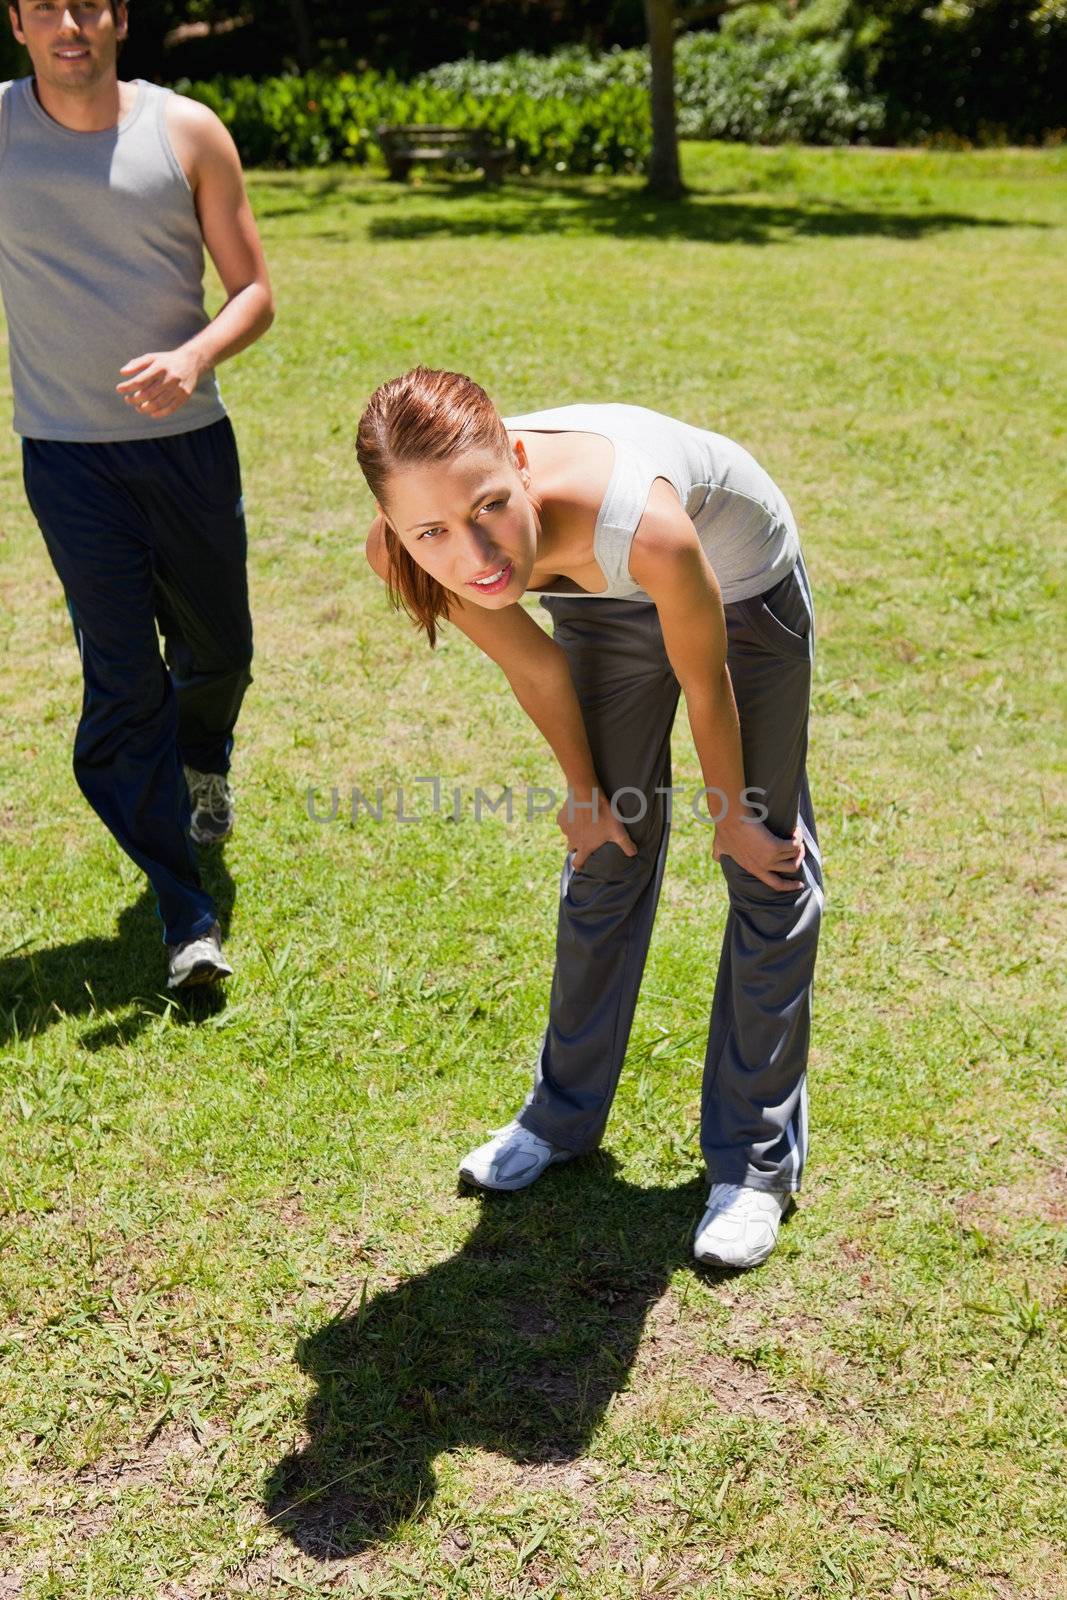 Woman bending over while a man is jogging behind her by Wavebreakmedia